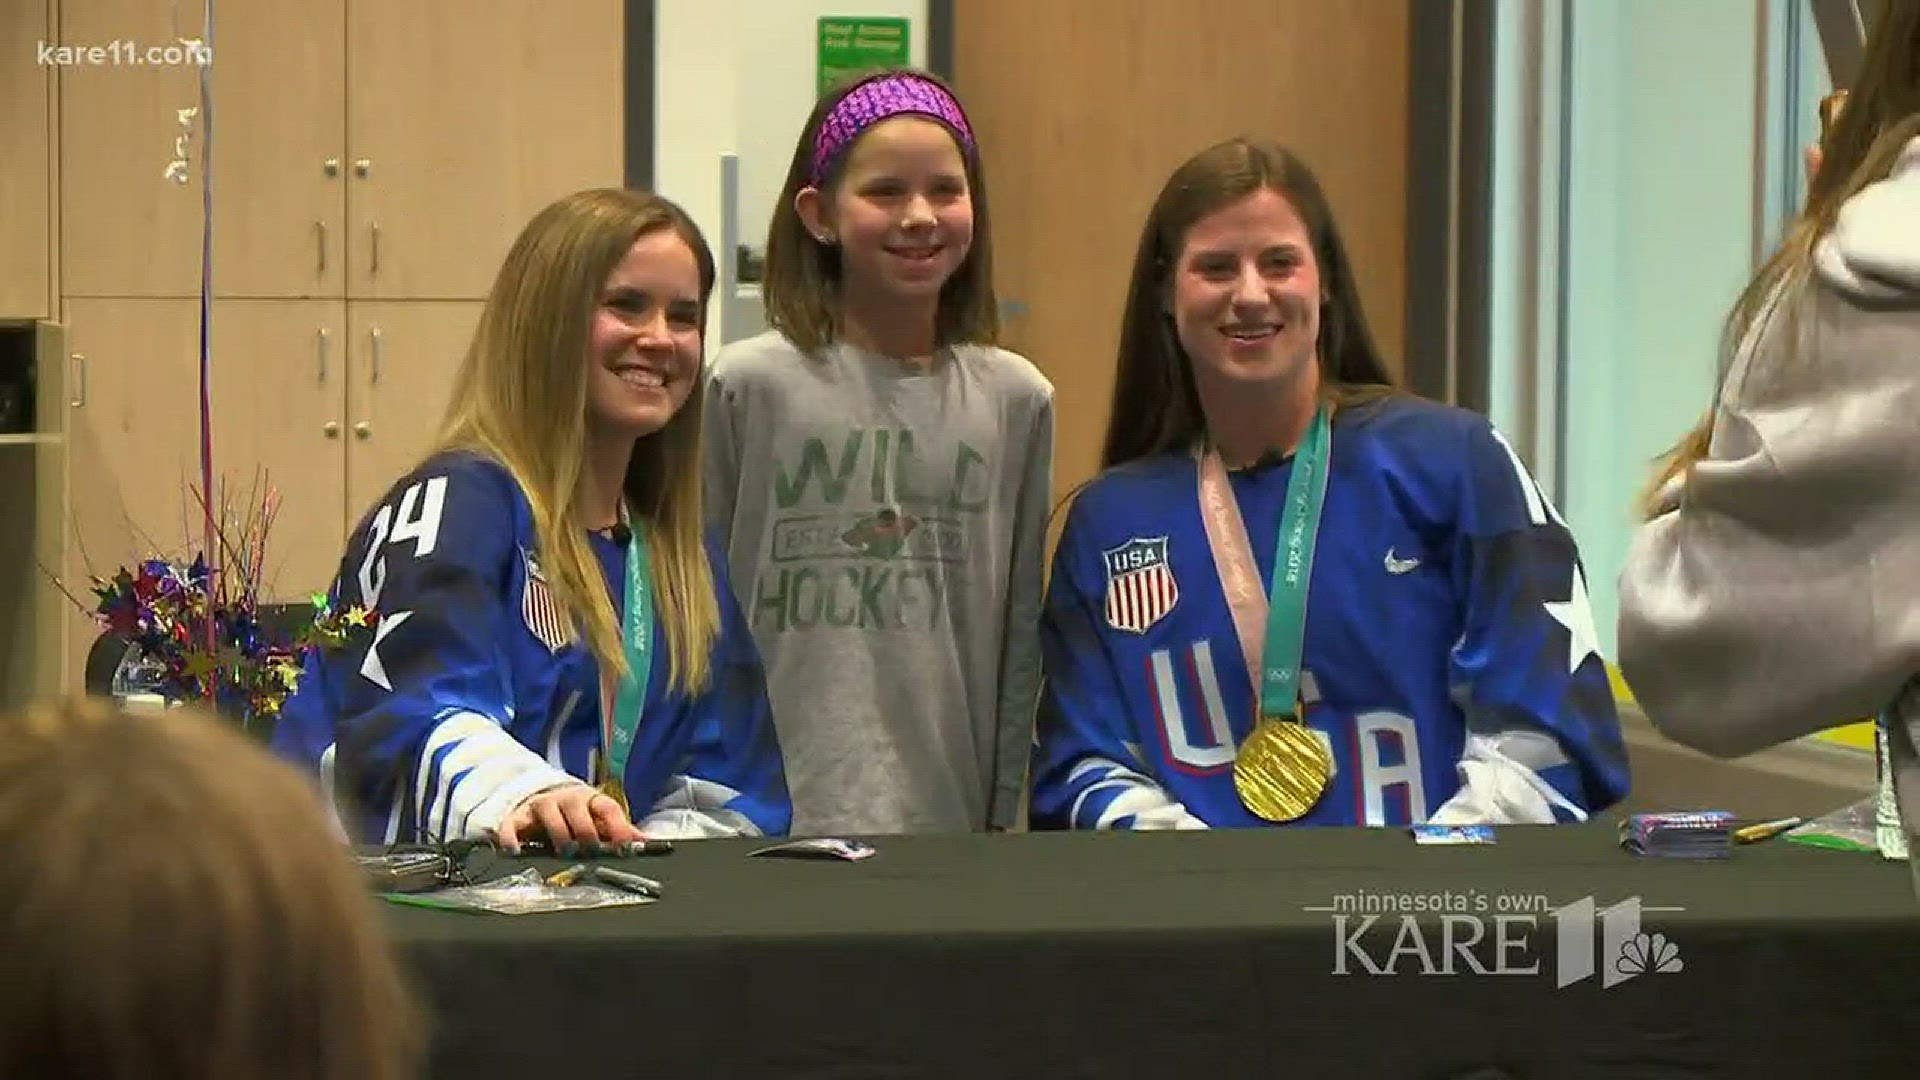 Two teammates thanked their community for the support after they helped lead Team USA to gold at the Winter Olympics in Pyeongchang. http://kare11.tv/2FPVPR2